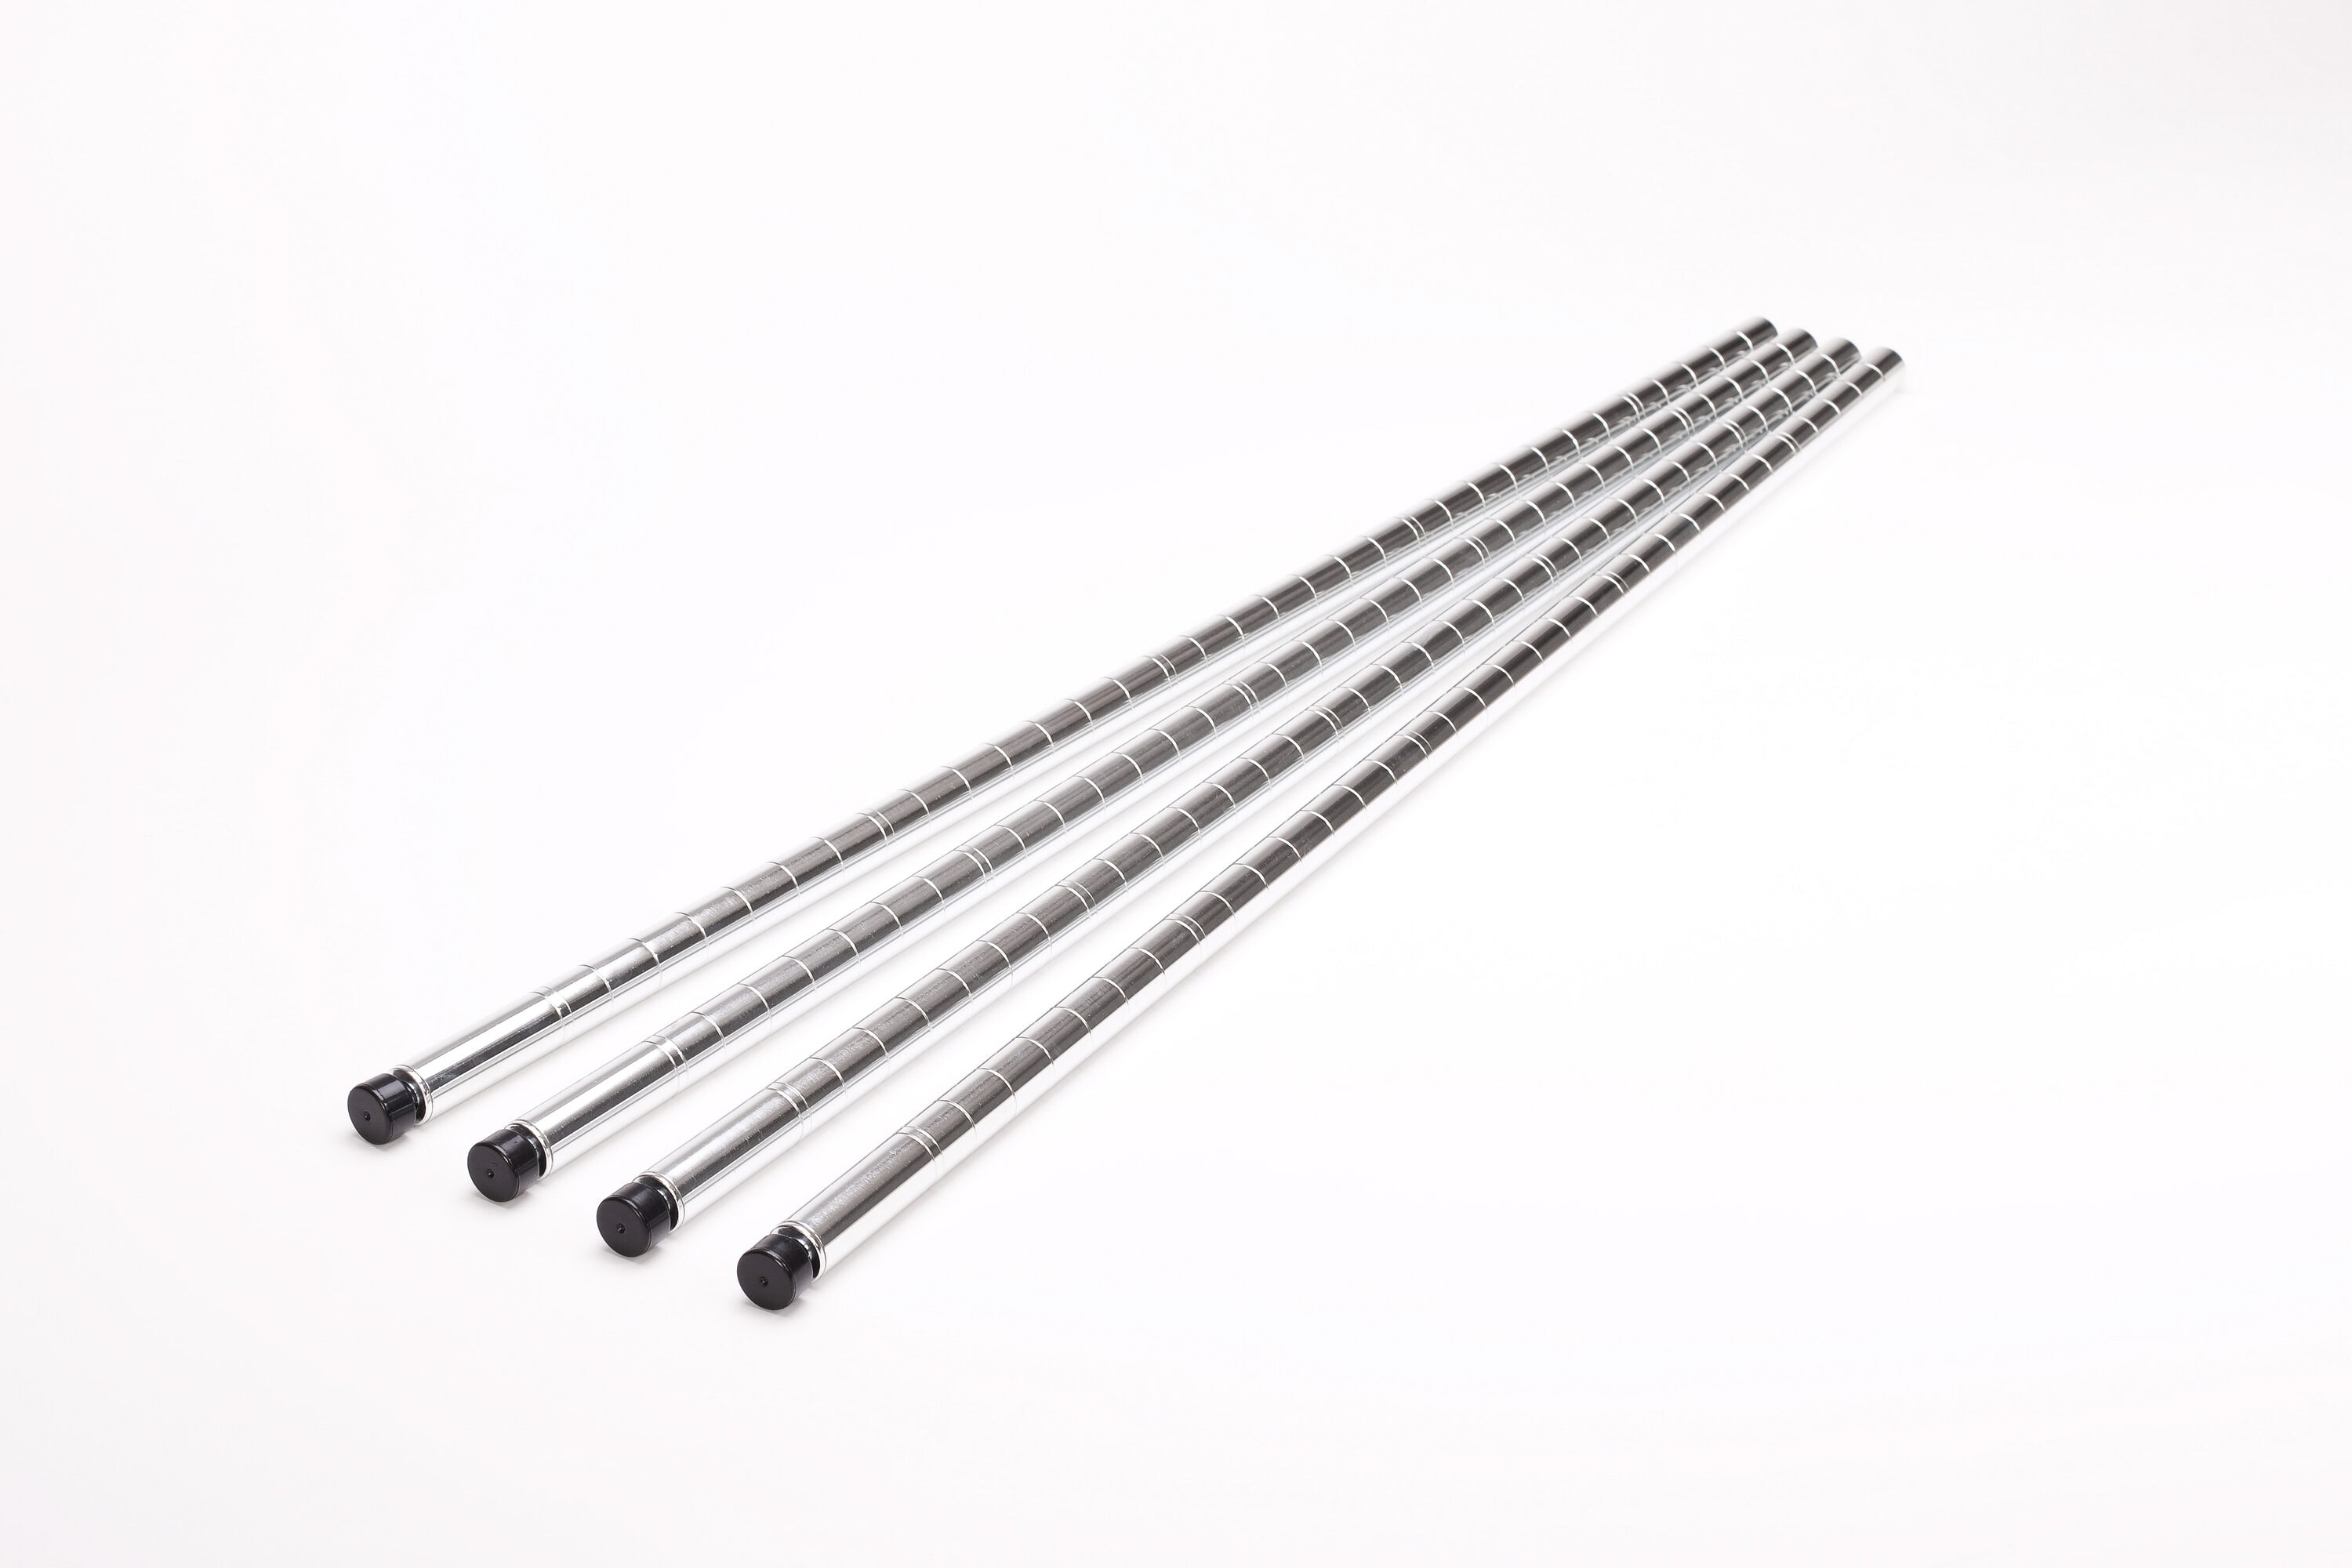 HSS Steel 12 Extension Pole 1 Diameter 1.2 mm Thickness Chrome 4-Pack,  Hardware 